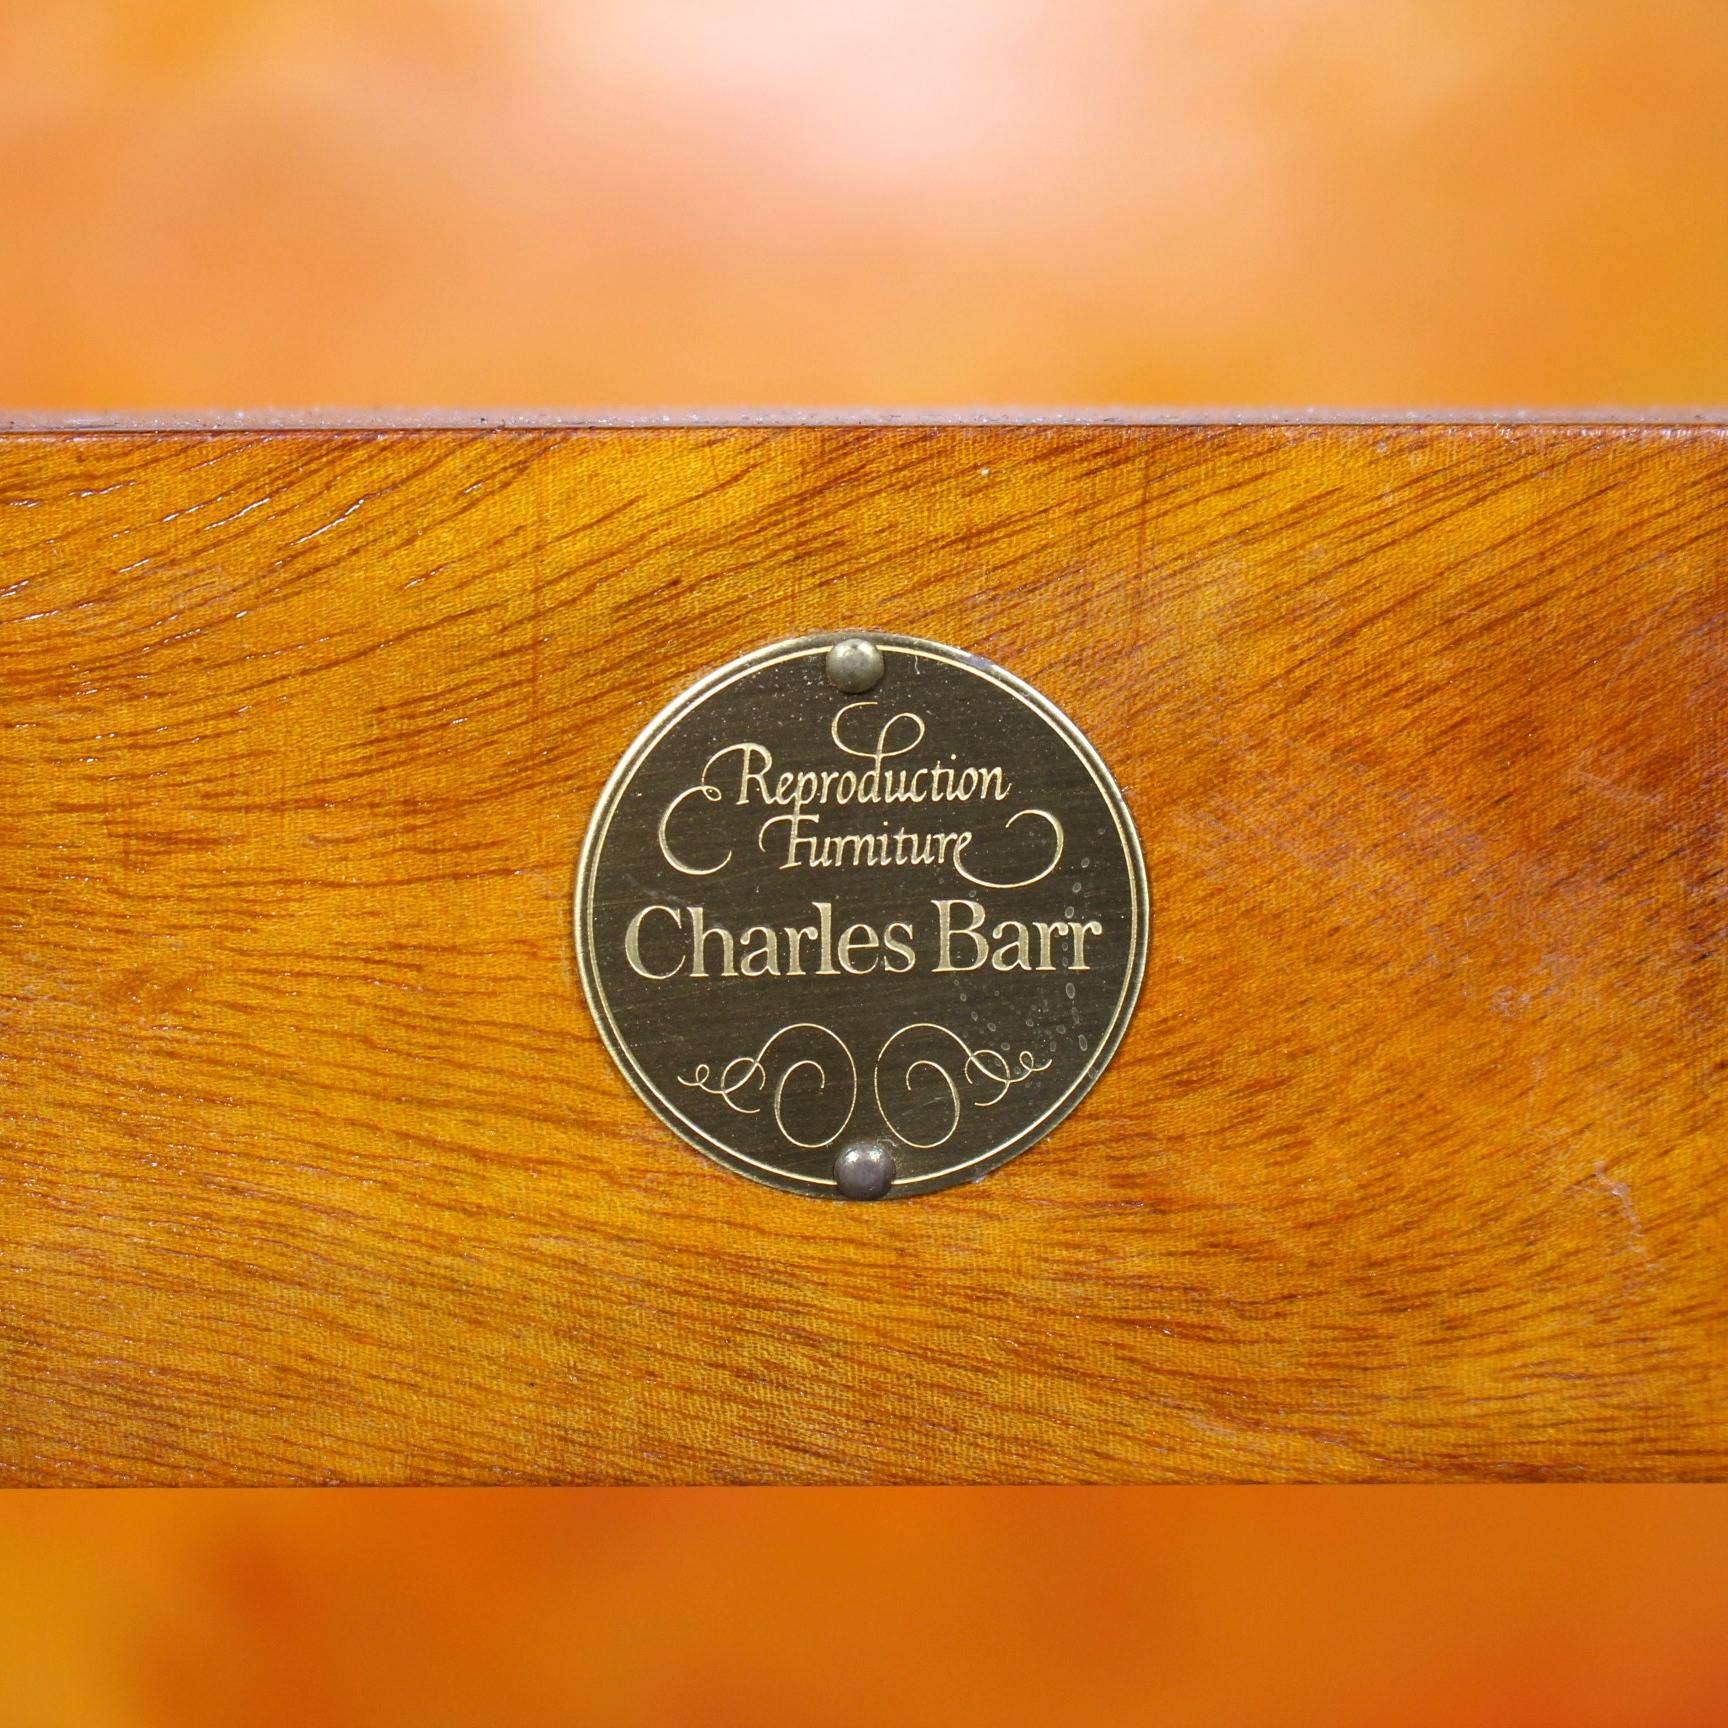 charles barr reproduction furniture